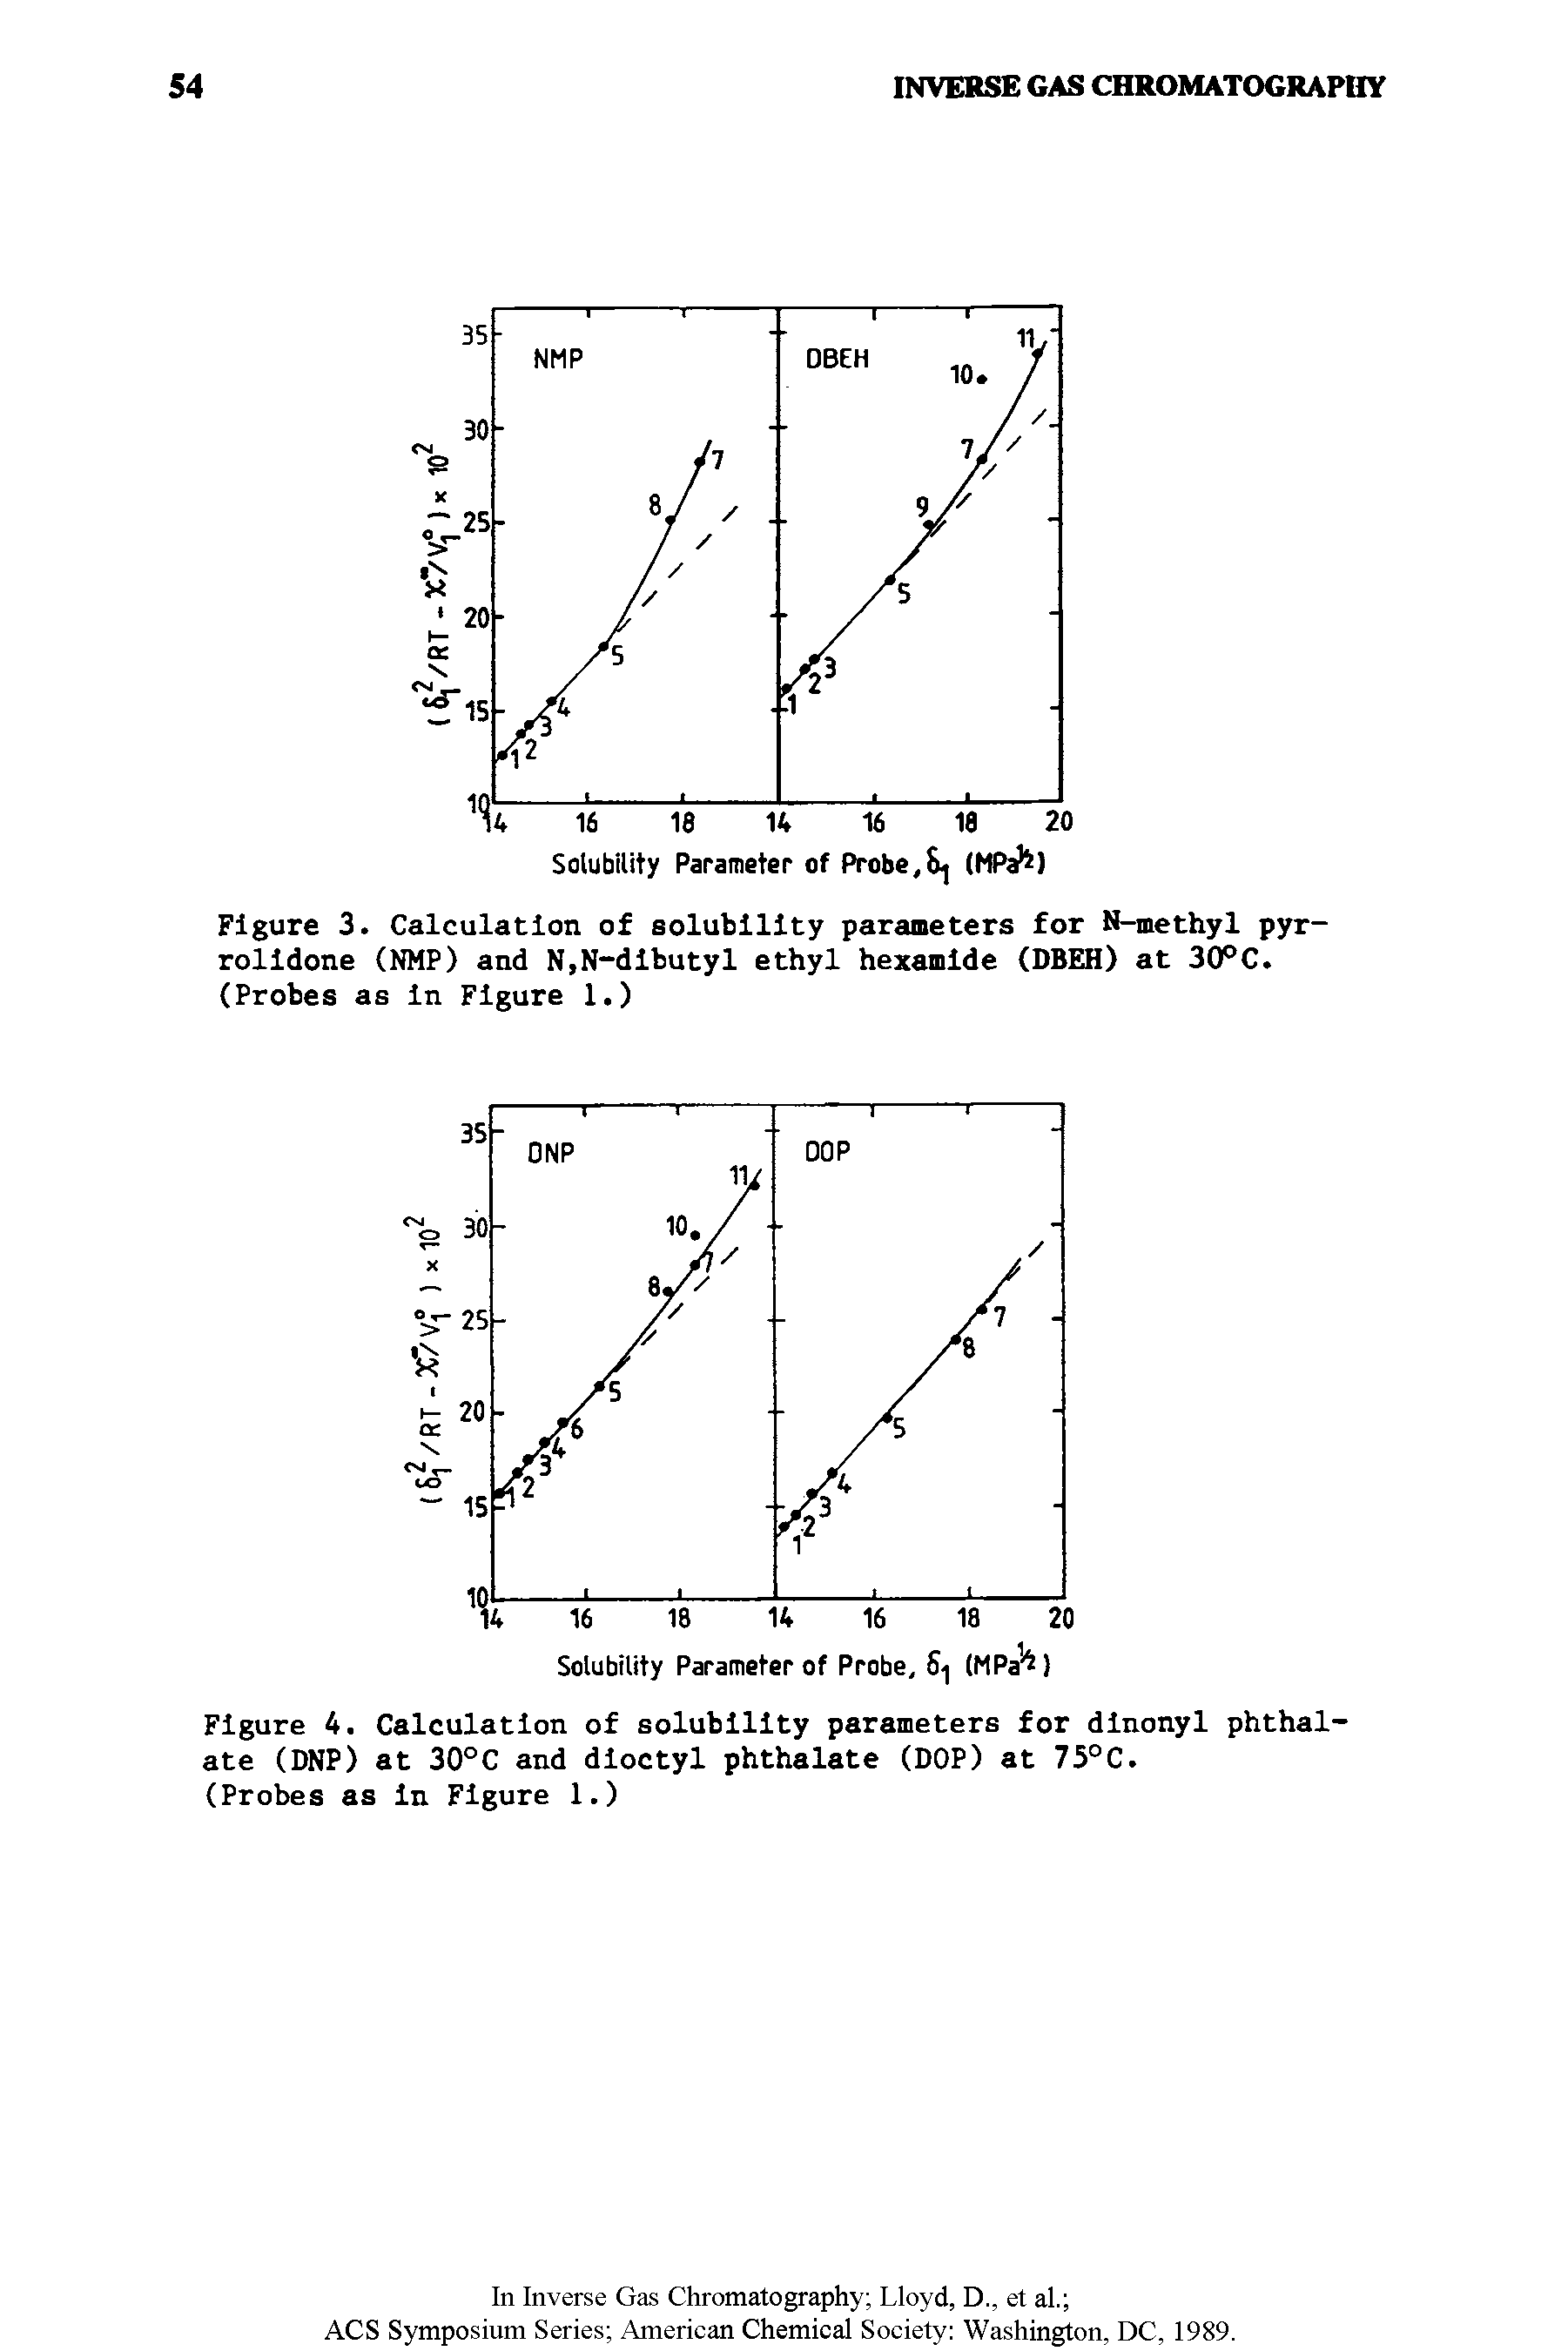 Figure 4. Calculation of solubility parameters for dinonyl phthal-ate (DNP) at 30°C and dioctyl phthalate (DOP) at 75°C.